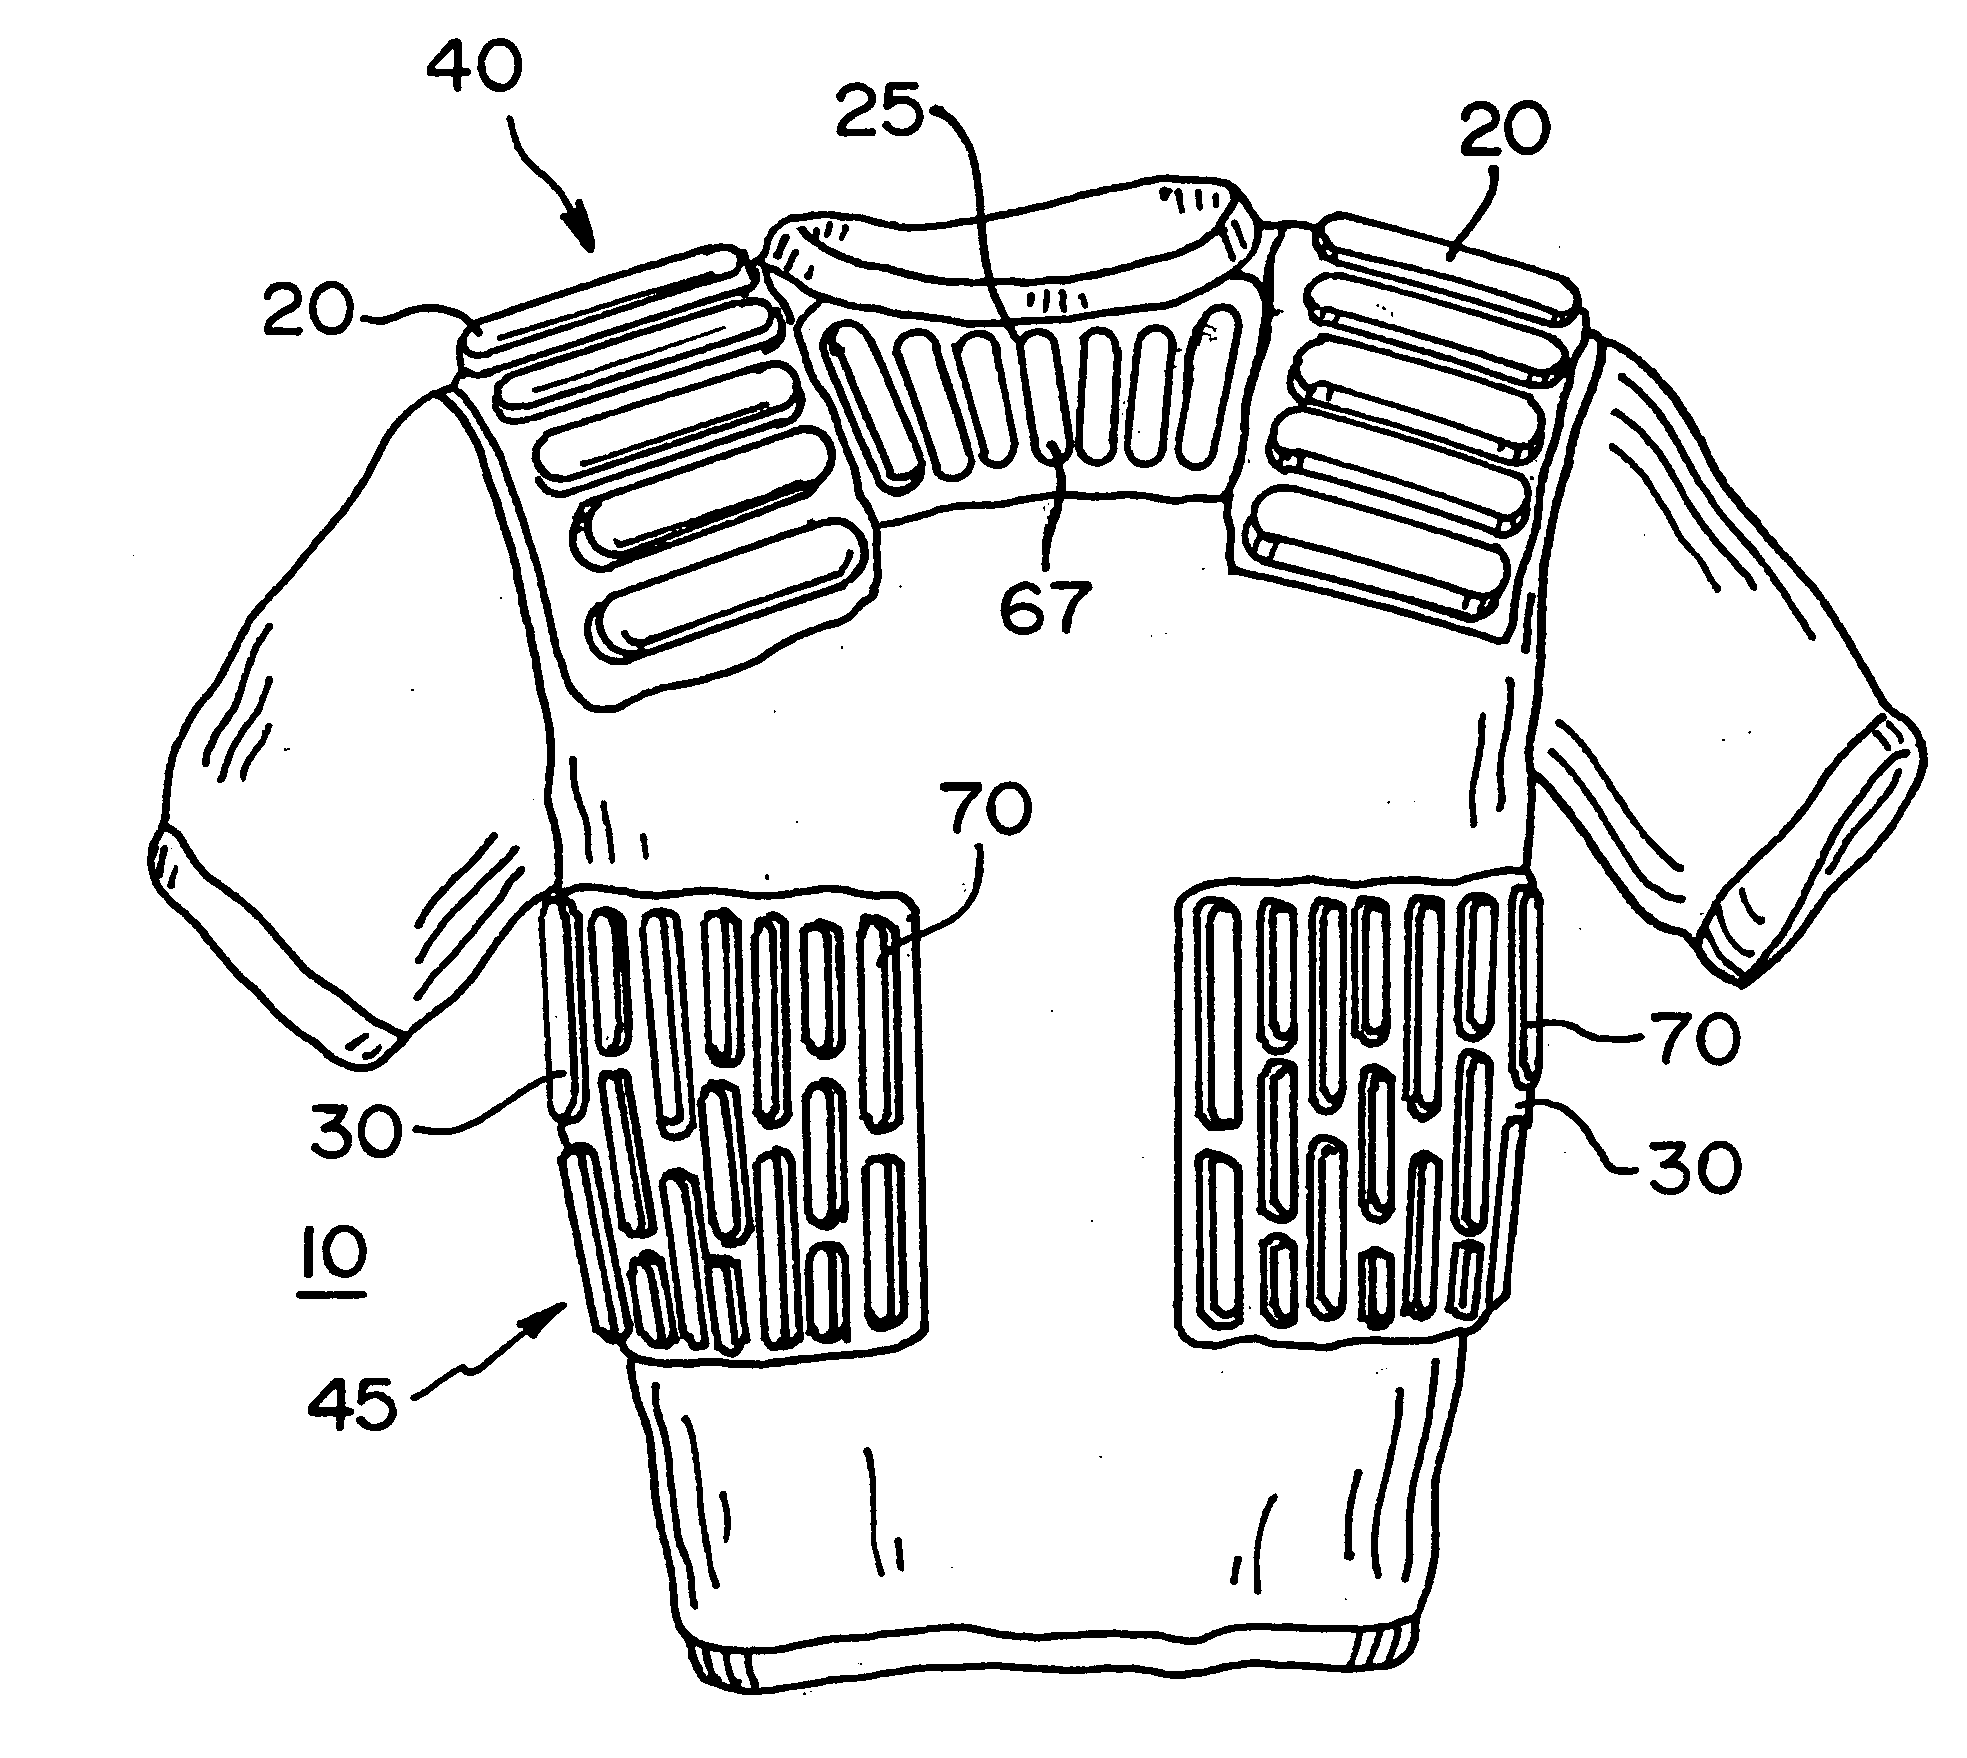 Garment with energy dissipating conformable padding